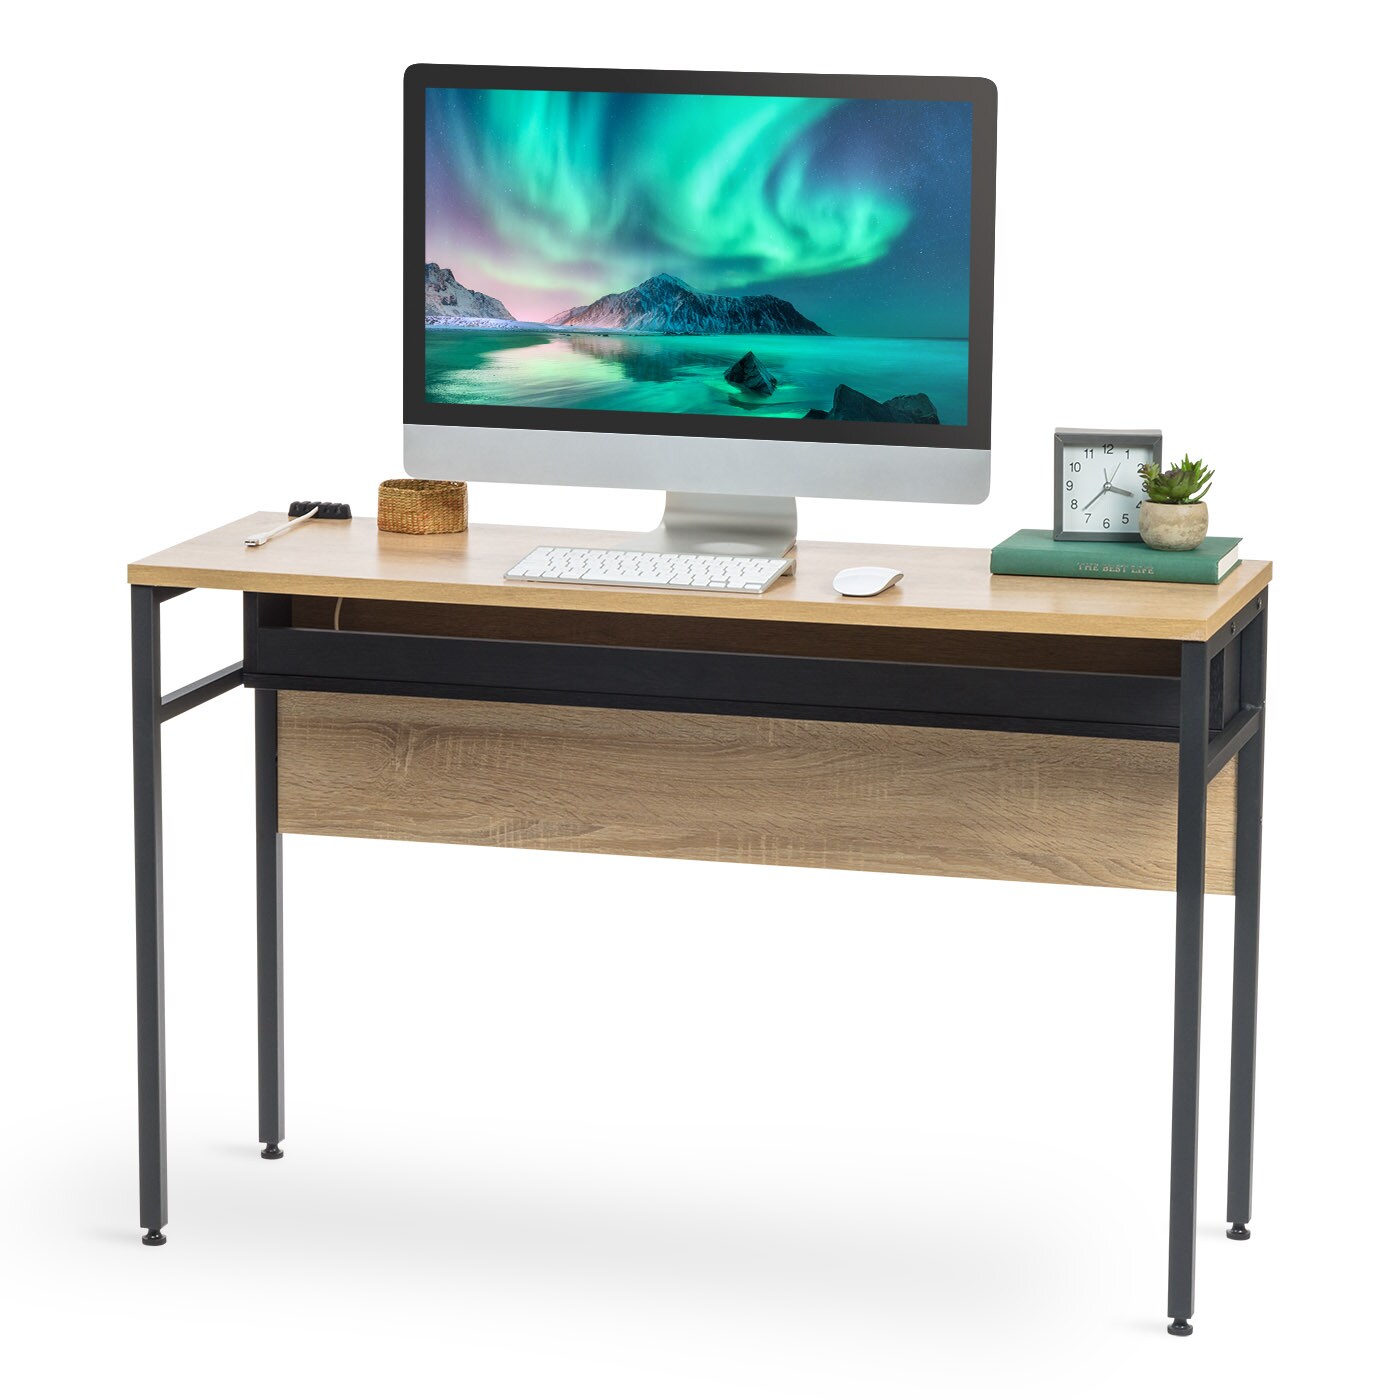 IRIS USA Office Computer Desk Table with Organizer and Cable Tray